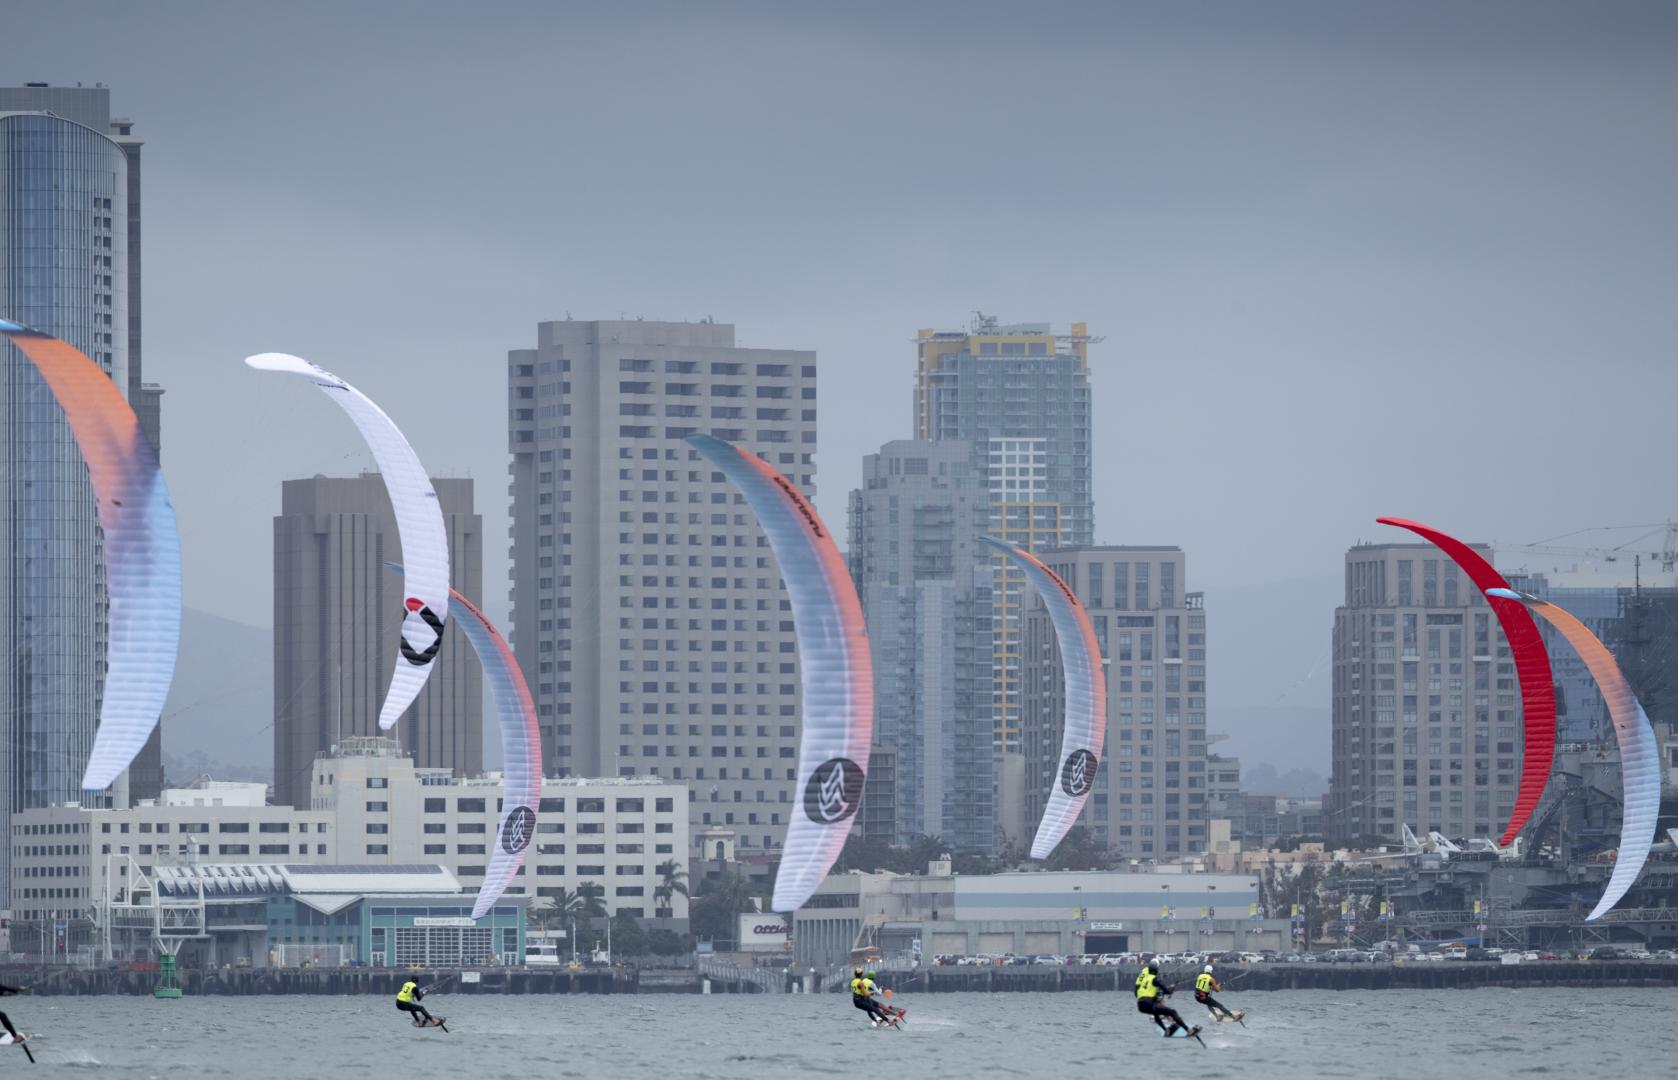 Alinghi stays ahead but SAP Extreme Sailing Team applies the pressure on spectacular day in San Diego